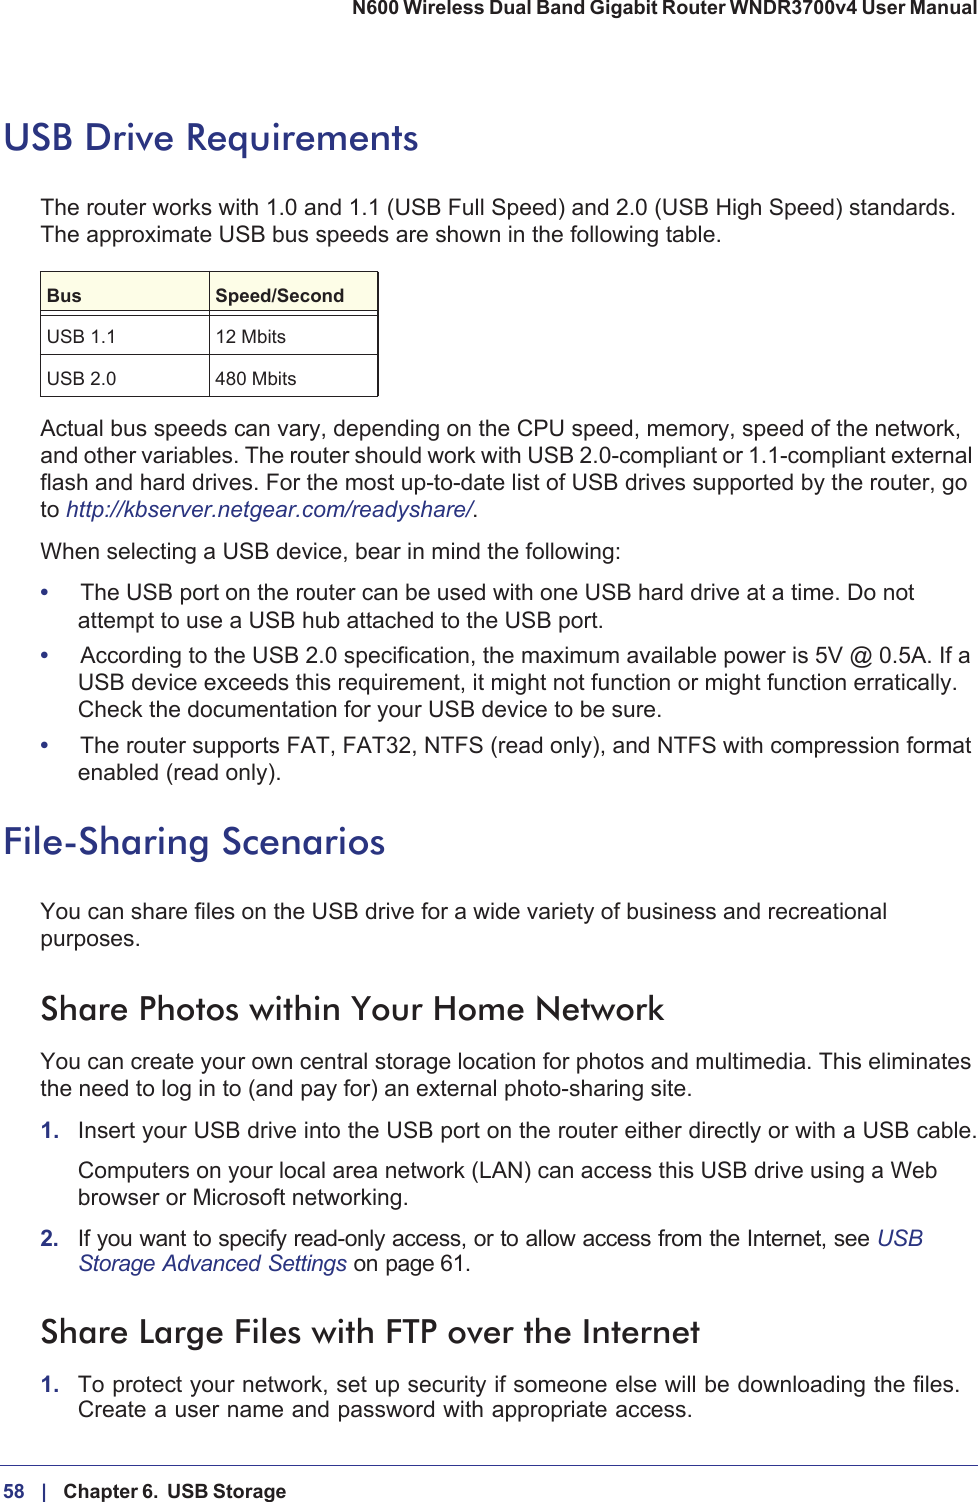 58 |    Chapter 6.  USB Storage N600 Wireless Dual Band Gigabit Router WNDR3700v4 User Manual USB Drive RequirementsThe router works with 1.0 and 1.1 (USB Full Speed) and 2.0 (USB High Speed) standards. The approximate USB bus speeds are shown in the following table.Bus Speed/SecondUSB 1.1 12 MbitsUSB 2.0 480 MbitsActual bus speeds can vary, depending on the CPU speed, memory, speed of the network, and other variables. The router should work with USB 2.0-compliant or 1.1-compliant external flash and hard drives. For the most up-to-date list of USB drives supported by the router, go to http://kbserver.netgear.com/readyshare/.When selecting a USB device, bear in mind the following: •The USB port on the router can be used with one USB hard drive at a time. Do not attempt to use a USB hub attached to the USB port.•According to the USB 2.0 specification, the maximum available power is 5V @ 0.5A. If a USB device exceeds this requirement, it might not function or might function erratically. Check the documentation for your USB device to be sure.•The router supports FAT, FAT32, NTFS (read only), and NTFS with compression format enabled (read only). File-Sharing ScenariosYou can share files on the USB drive for a wide variety of business and recreational purposes. Share Photos within Your Home NetworkYou can create your own central storage location for photos and multimedia. This eliminates the need to log in to (and pay for) an external photo-sharing site. 1. Insert your USB drive into the USB port on the router either directly or with a USB cable.Computers on your local area network (LAN) can access this USB drive using a Web browser or Microsoft networking.2. If you want to specify read-only access, or to allow access from the Internet, see USBStorage Advanced Settings on page  61.Share Large Files with FTP over the Internet1. To protect your network, set up security if someone else will be downloading the files. Create a user name and password with appropriate access.